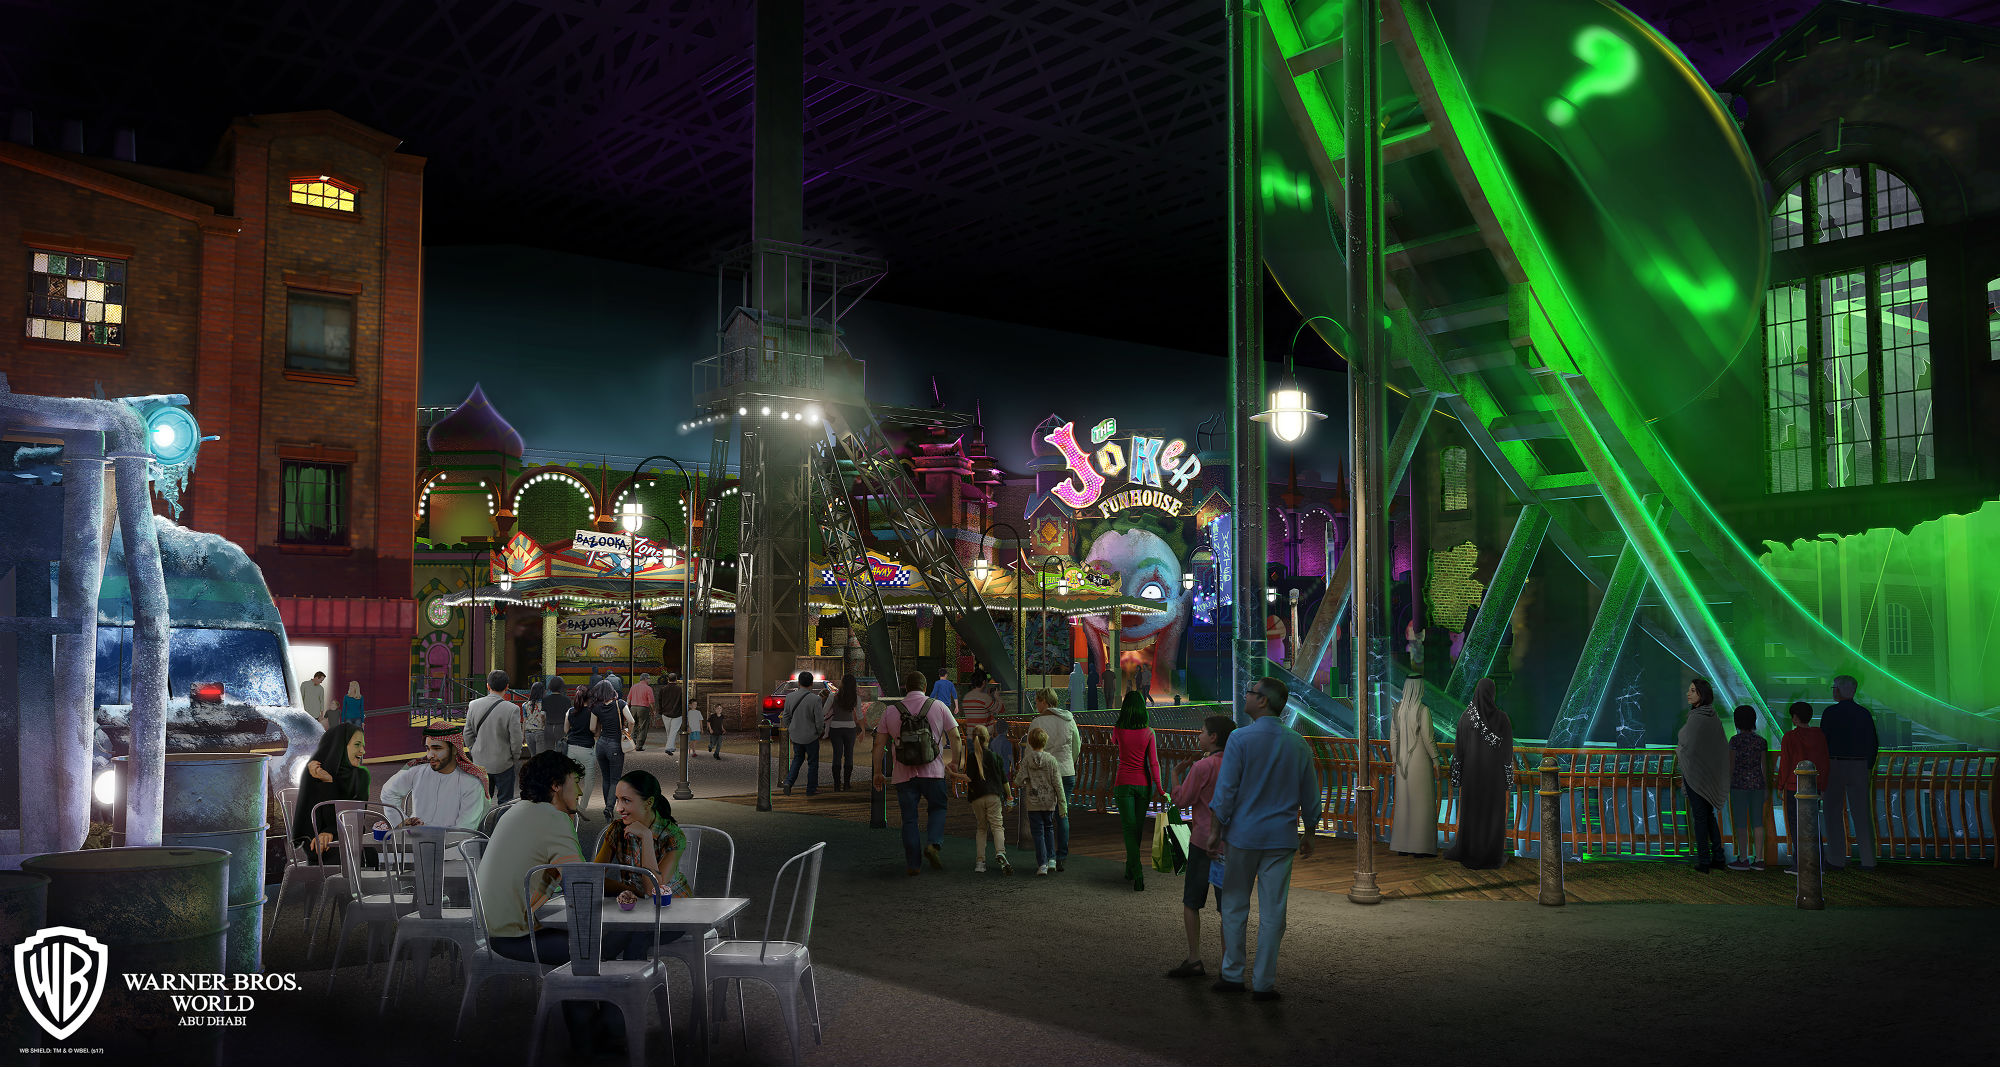 Here’s Your First Look At Gotham City In Warner Bros.’ Abu Dhabi Theme Park